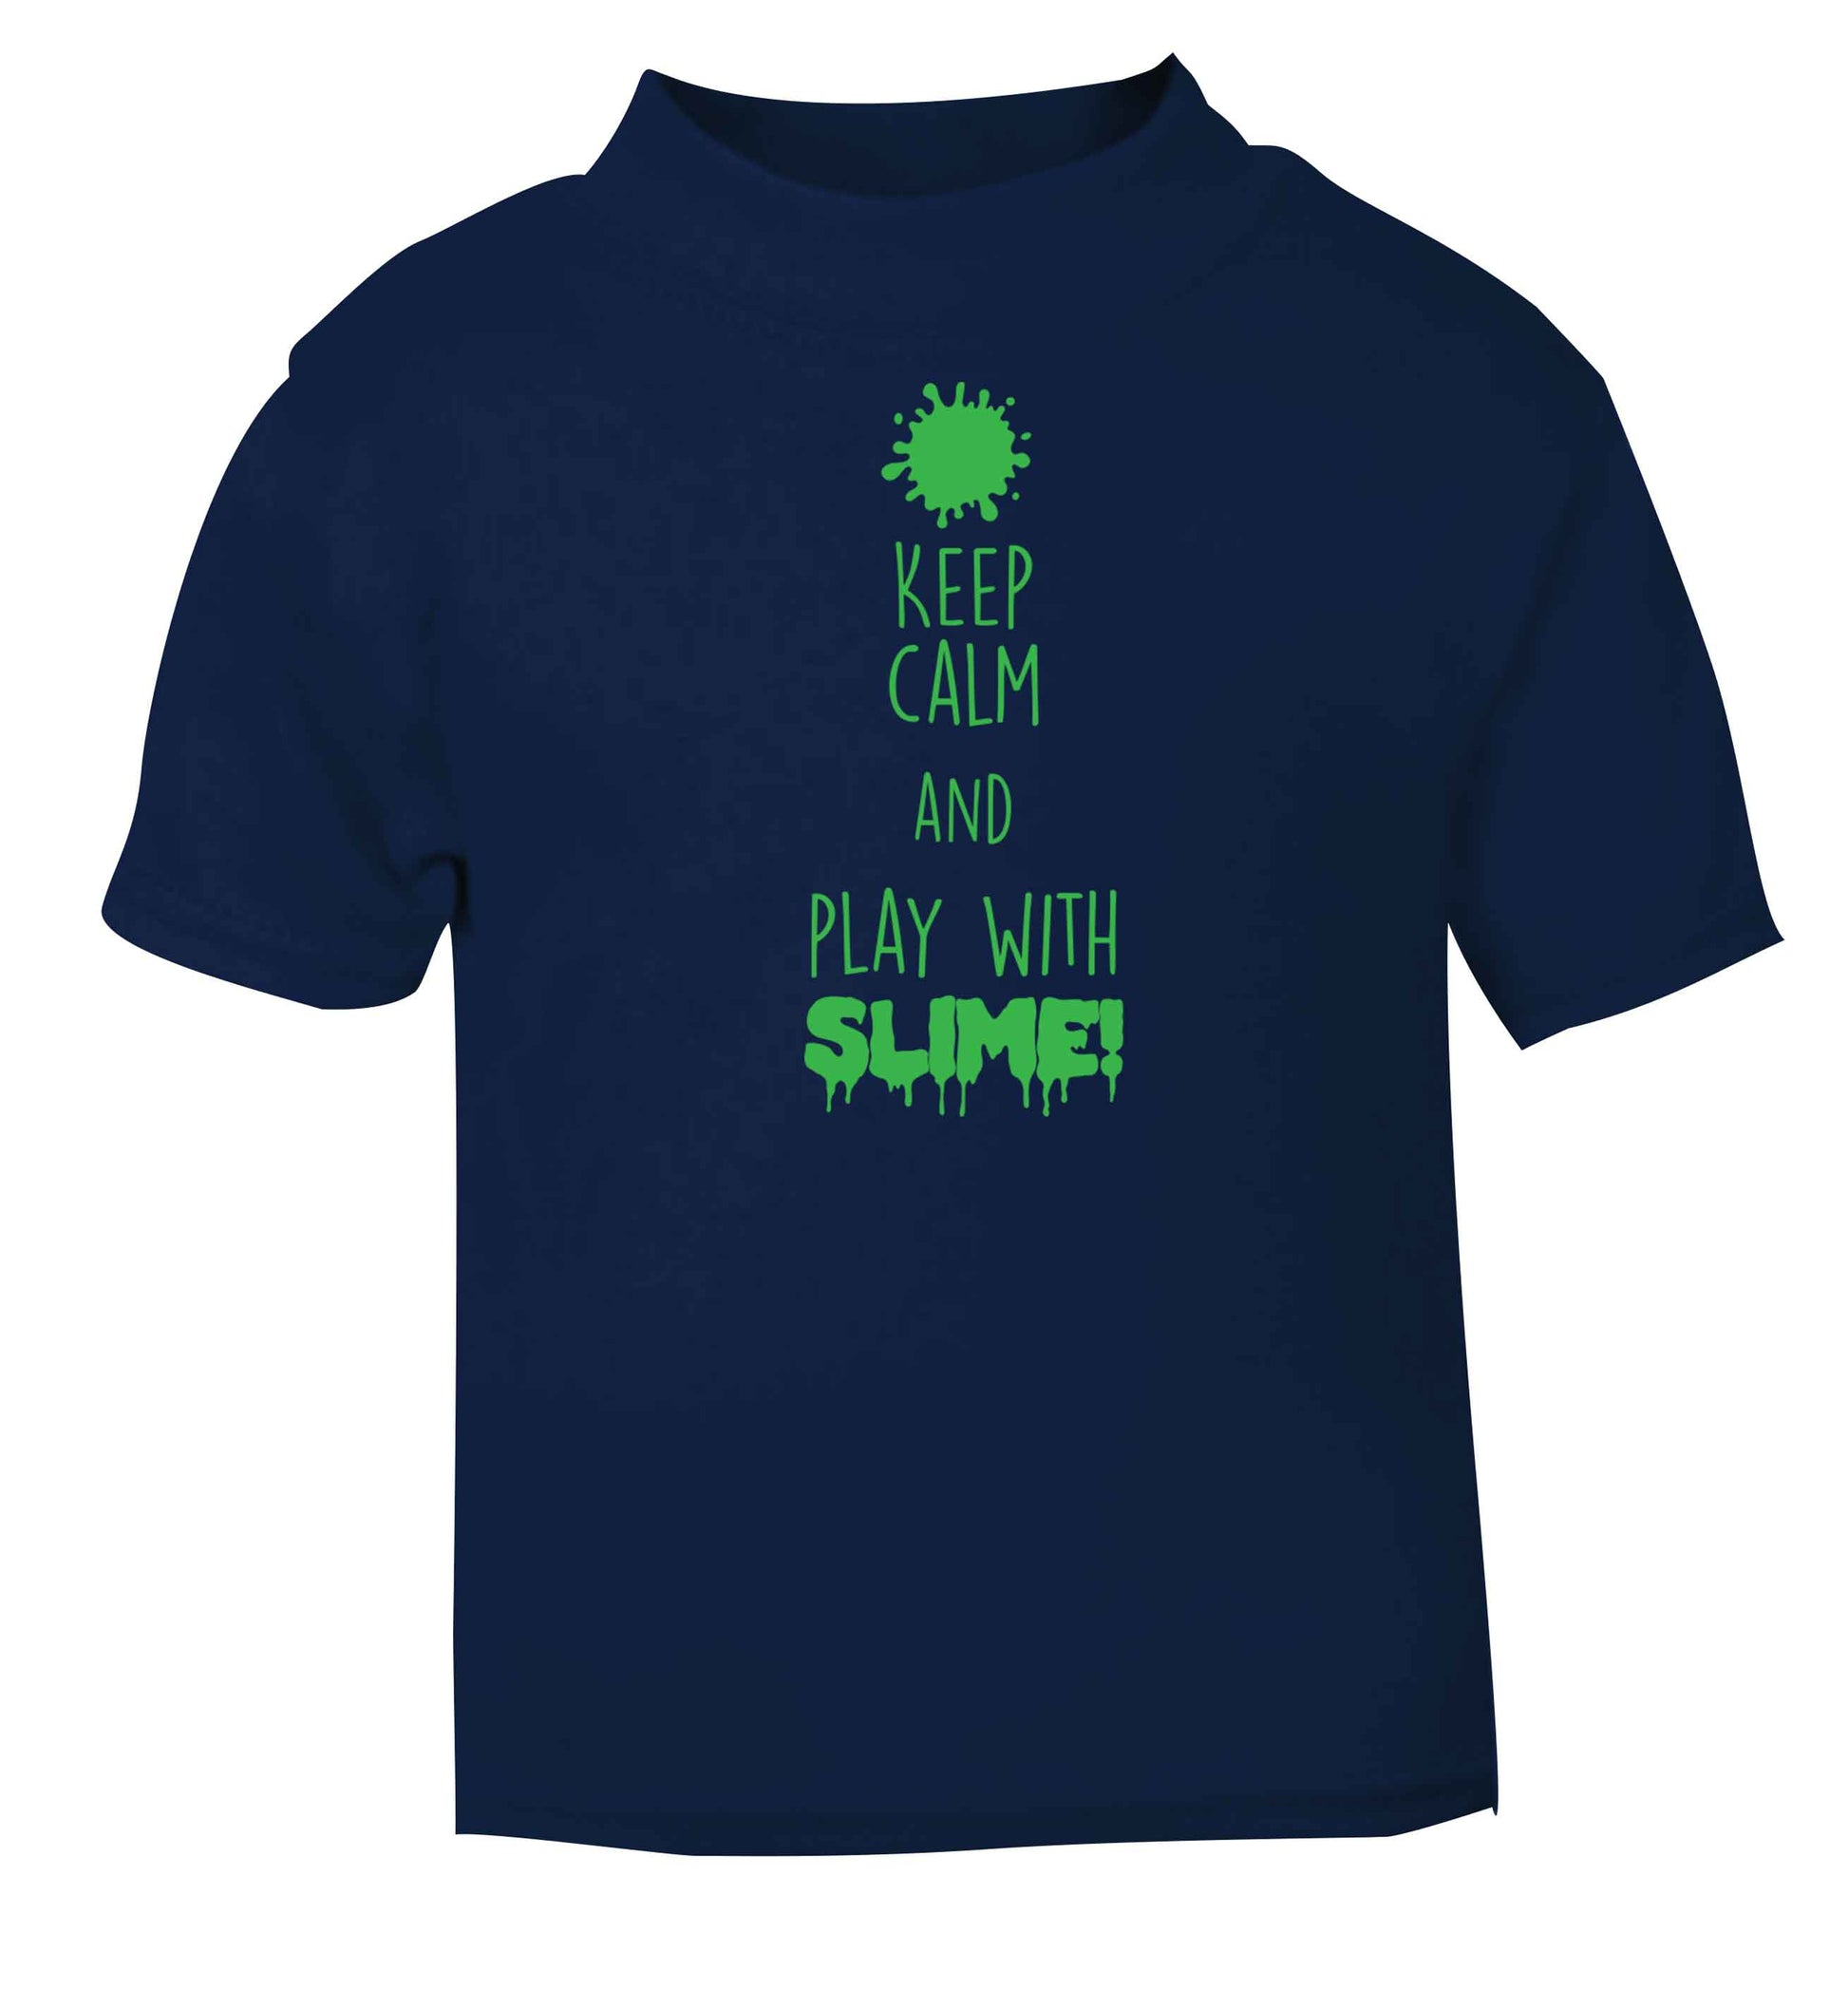 Neon green keep calm and play with slime!navy baby toddler Tshirt 2 Years